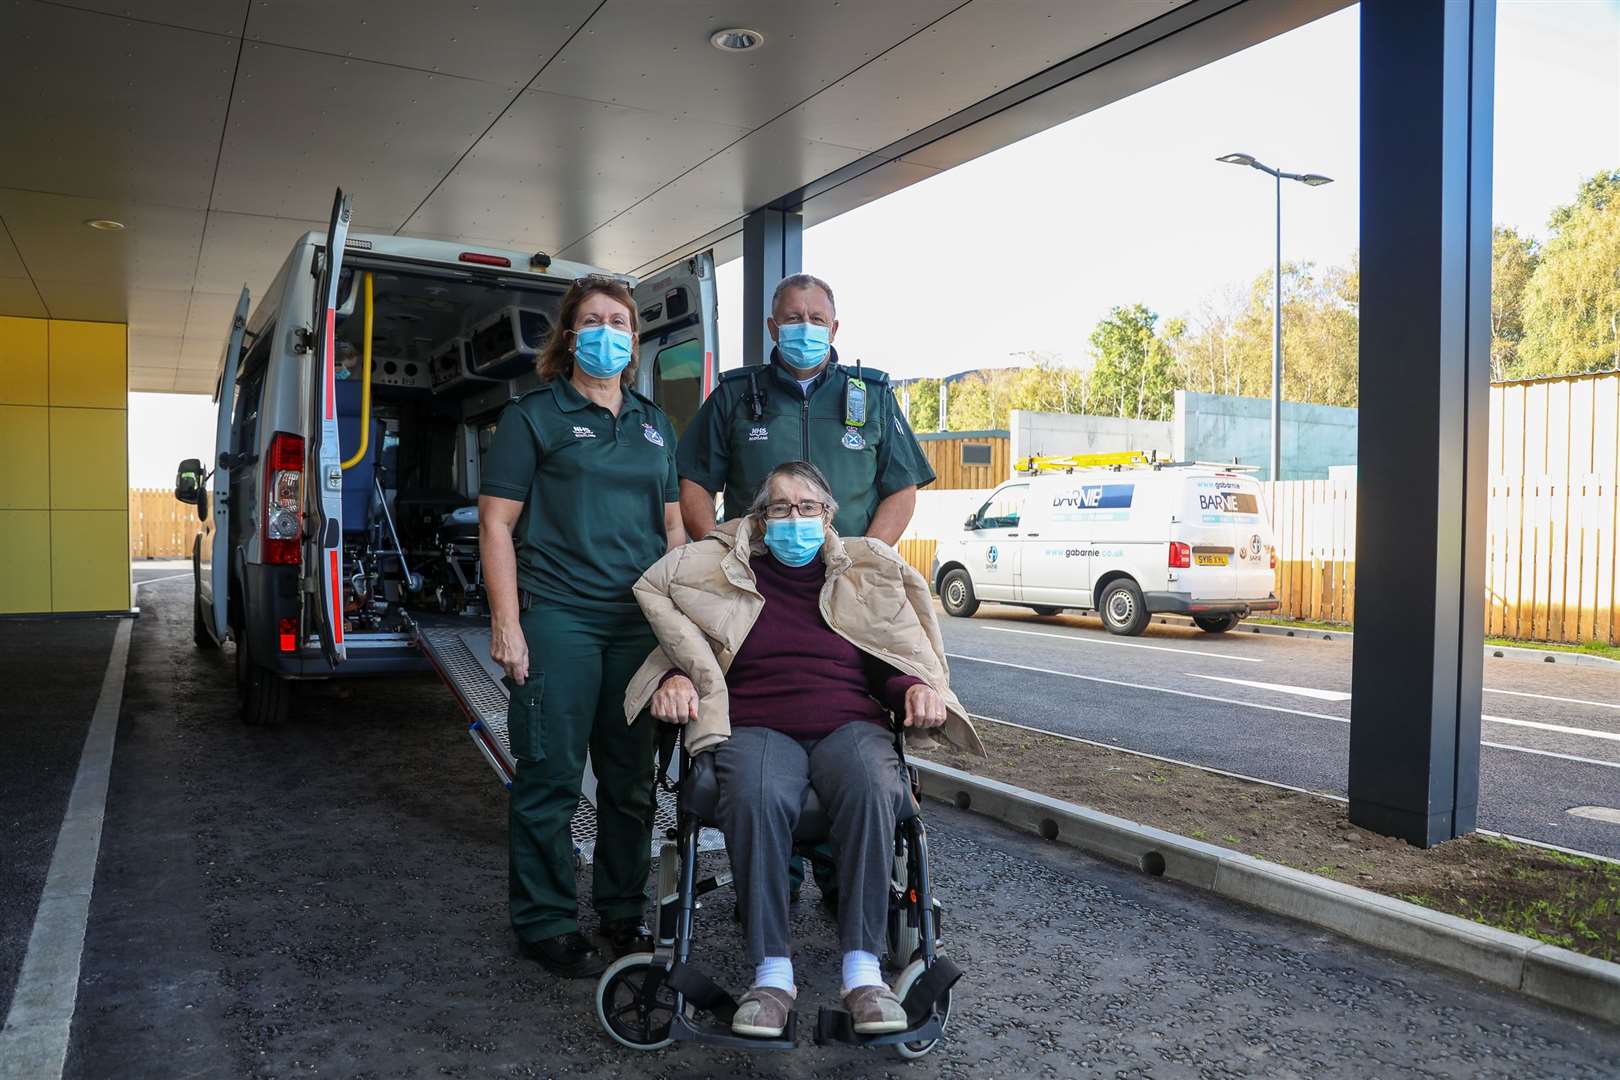 Scottish Ambulance Service staff members Suzanne Samuels and Adam Fell transfer Sarah Lyons to the new hospital. Ms Lyons was the first in-patient to arrive at the new facility in Aviemore and had previously been in St Vincent's Hospital in Kingussie. Photos: Aidan Woods